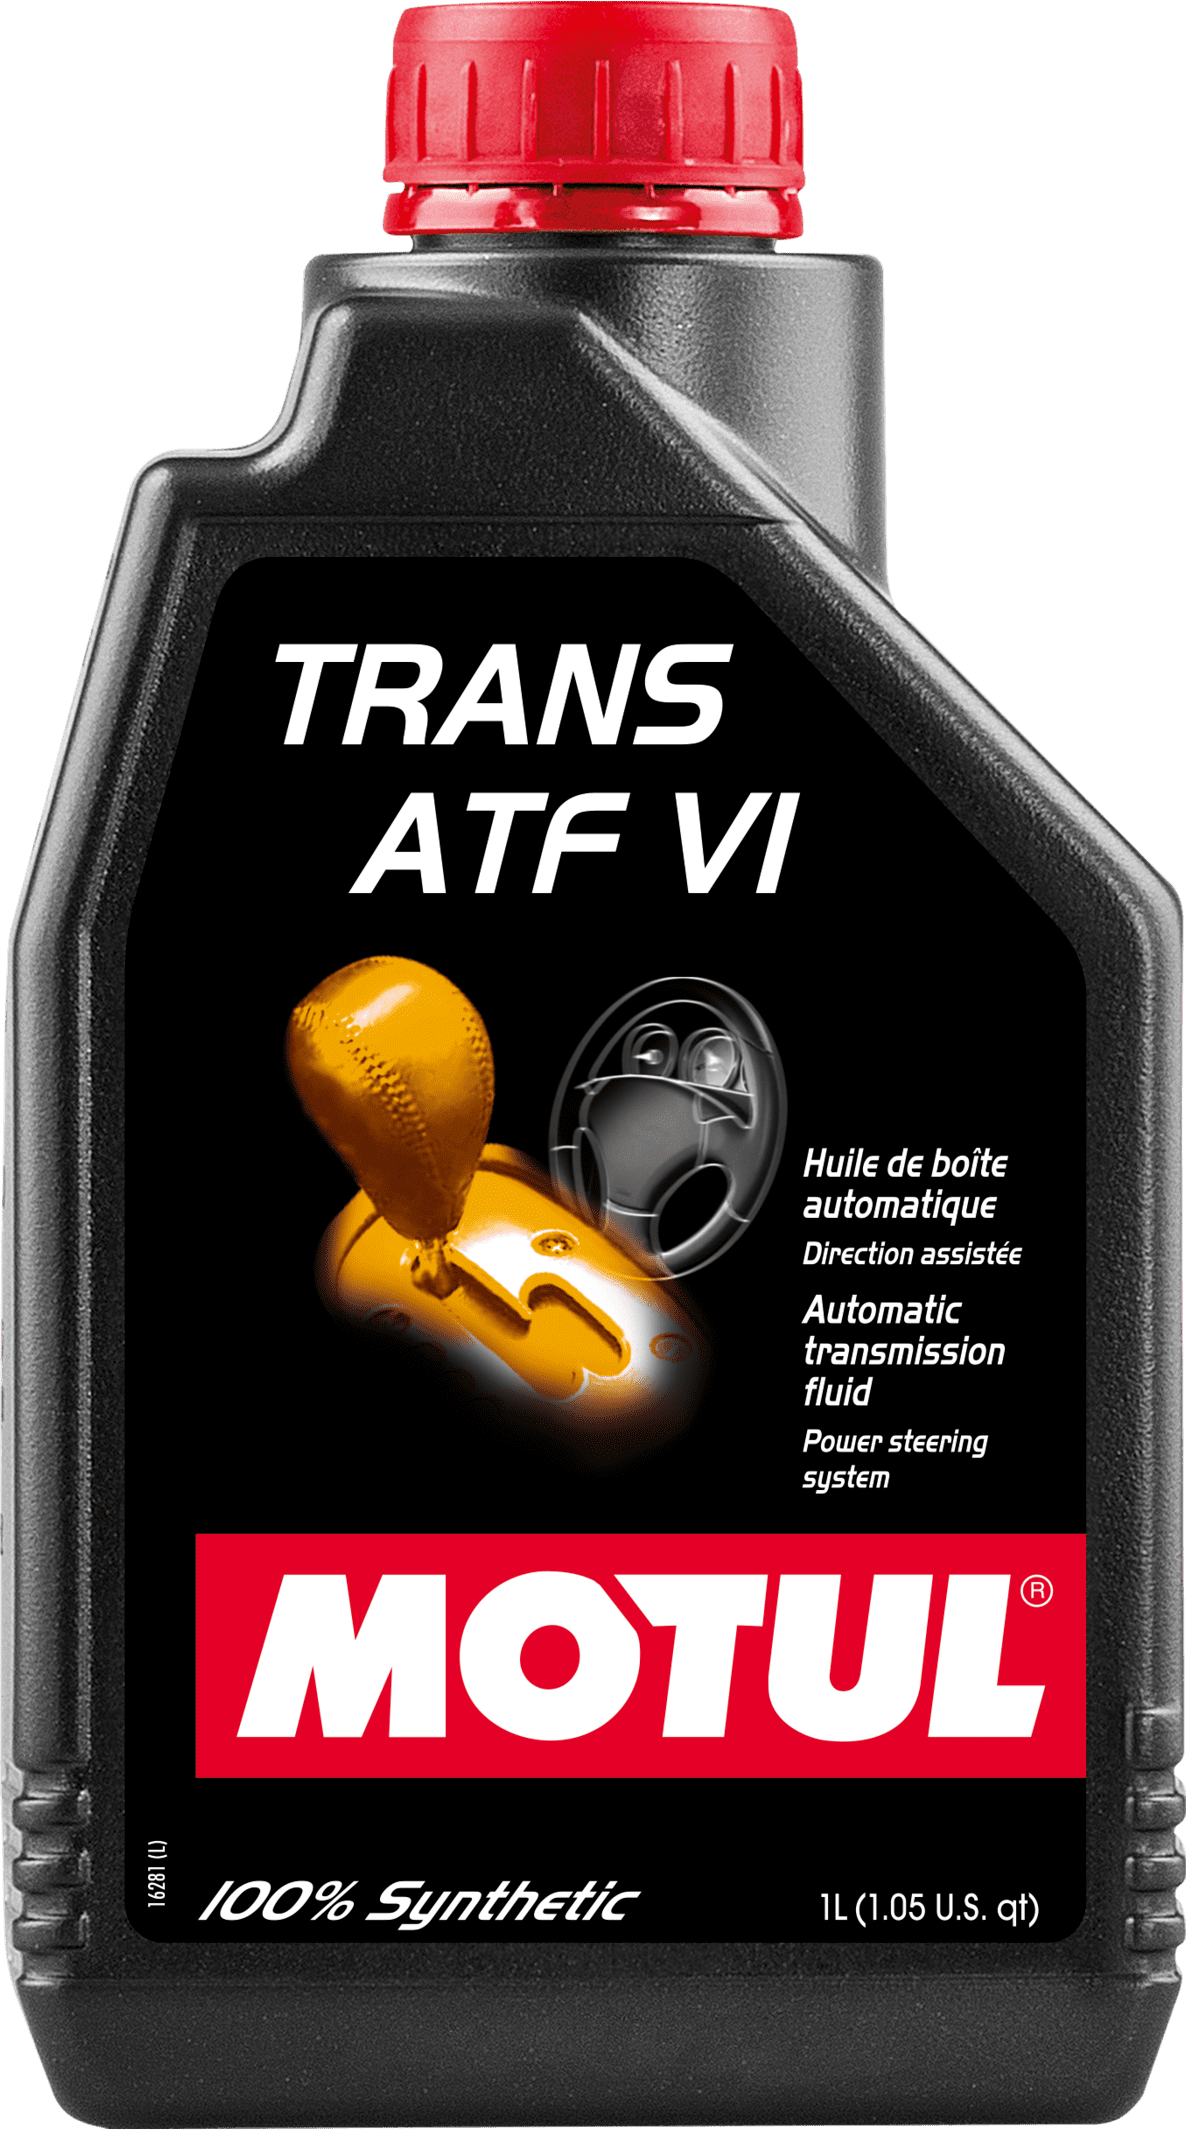 109771-1 100% Synthetic High performance low viscosity lubricant specially engineered for modern automatic transmission (manual mode, sequential mode, electronically controlled …) with or without slip lockup clutch requiring a DEXRON VI fluid.